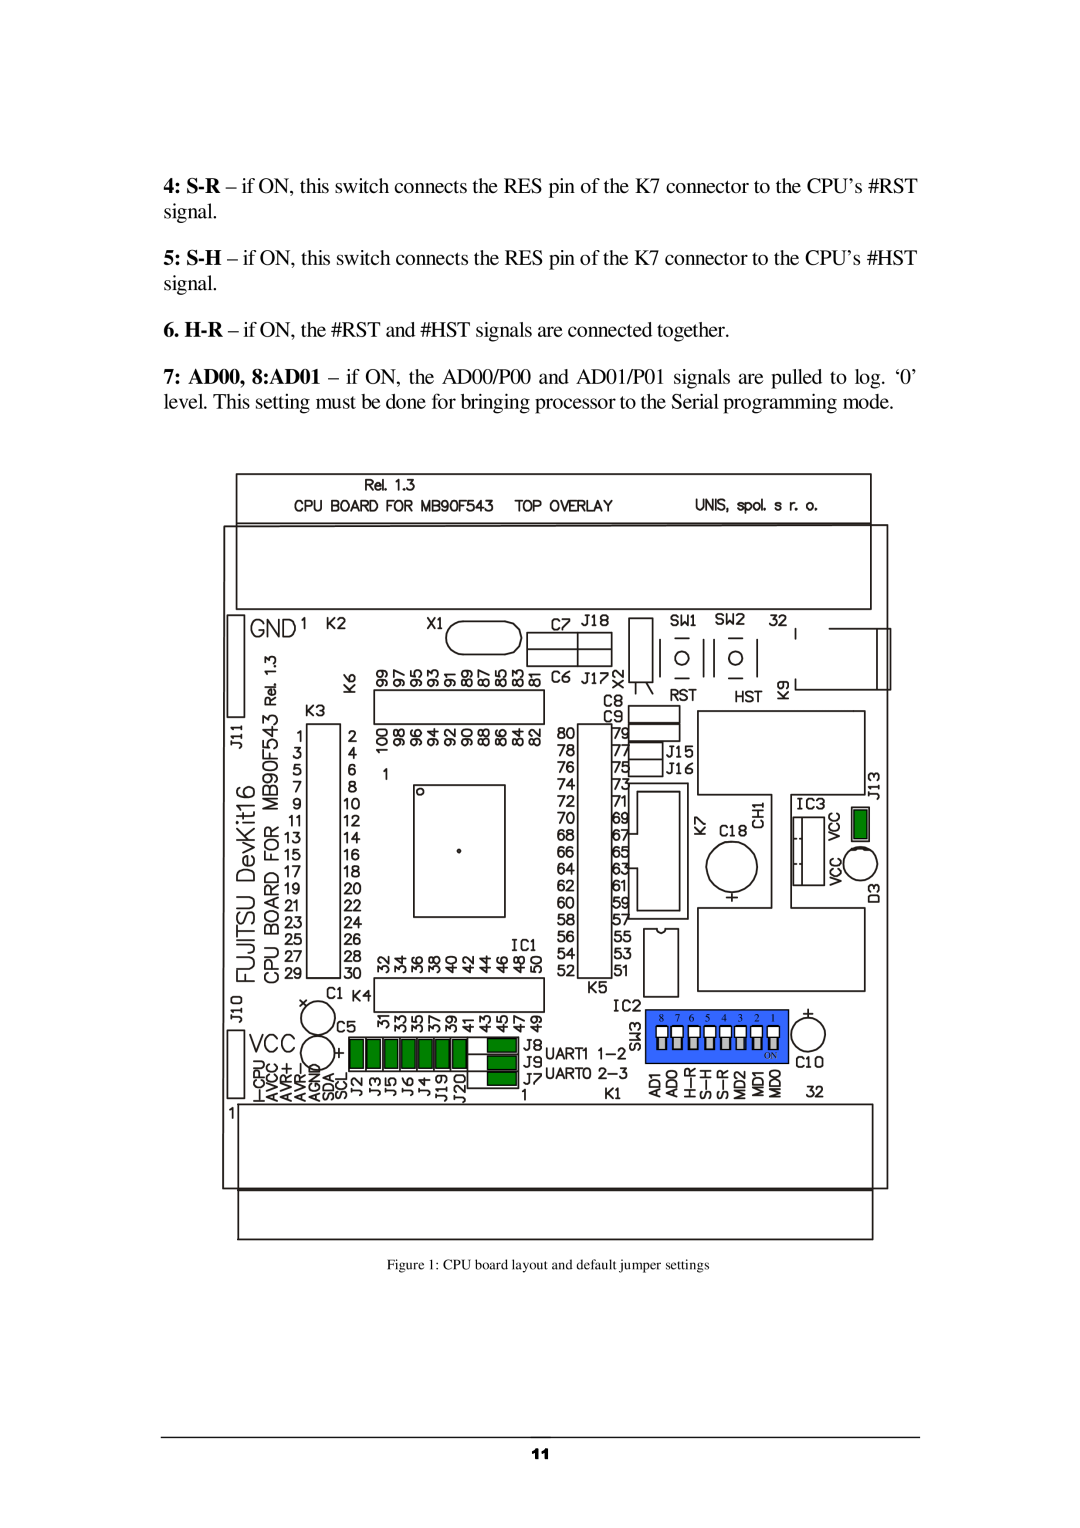 Fujitsu 16LX manual H-R - if ON, the #RST and #HST signals are connected together 